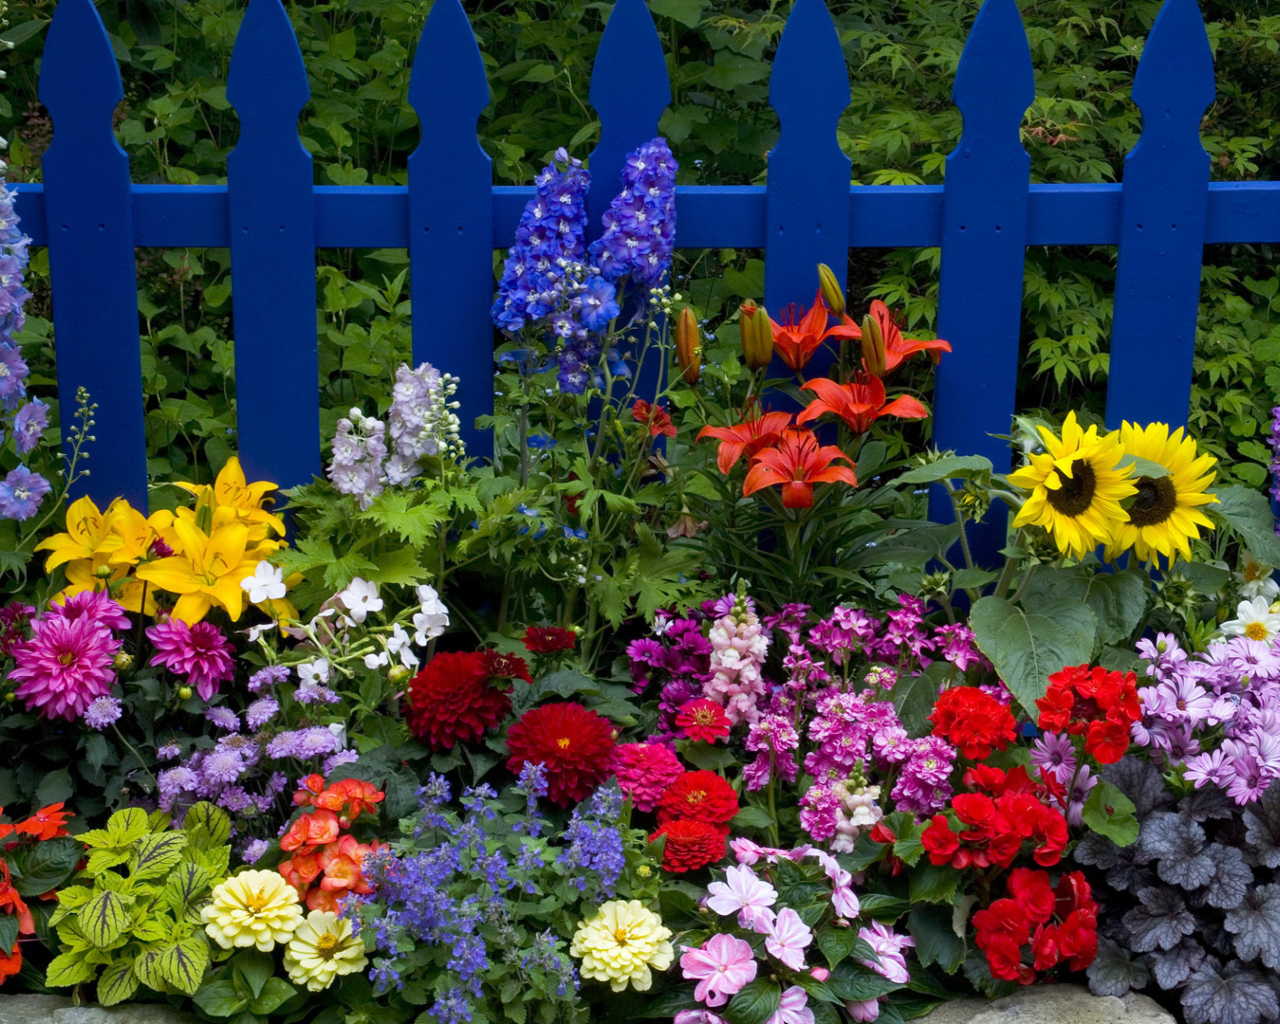 Garden Flowers In Front Of Bright Blue Fence screenshot #1 1280x1024